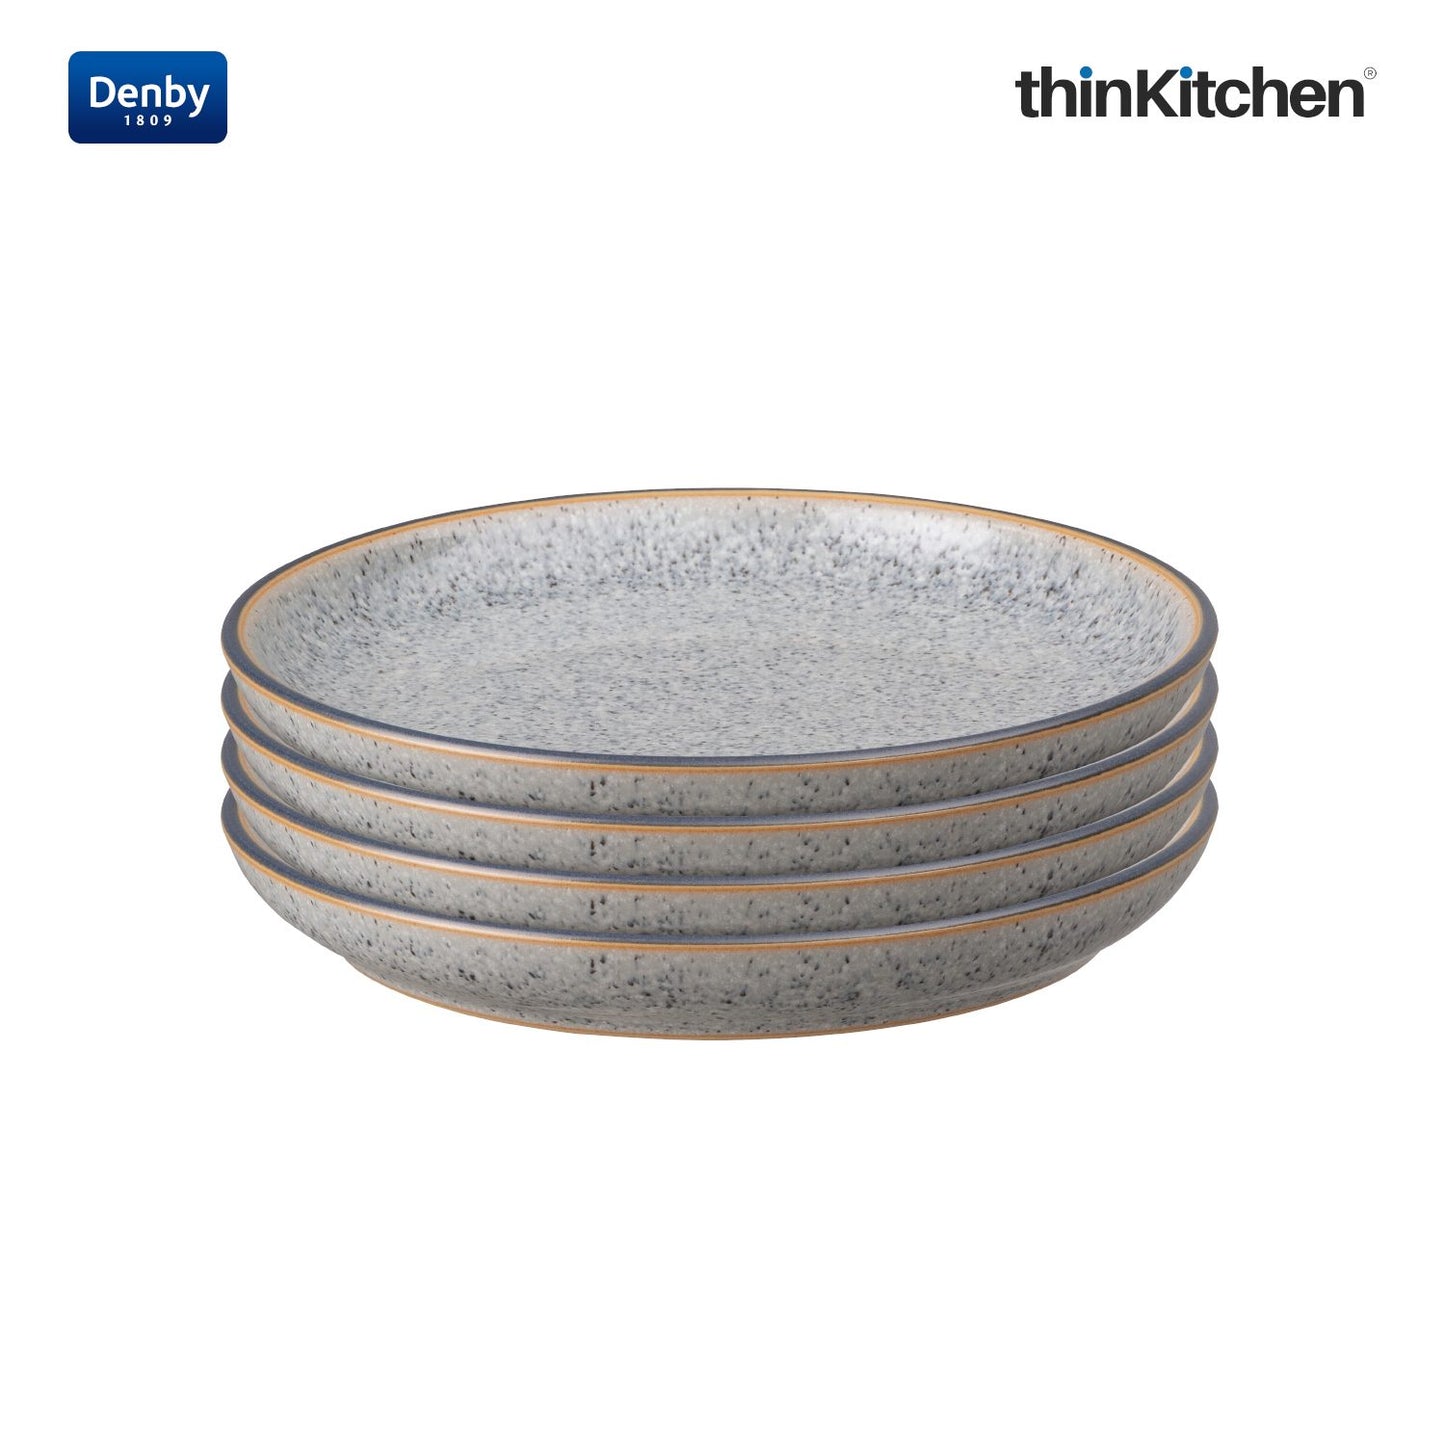 Denby Studio Grey Small Coupe Plate, Set of 4